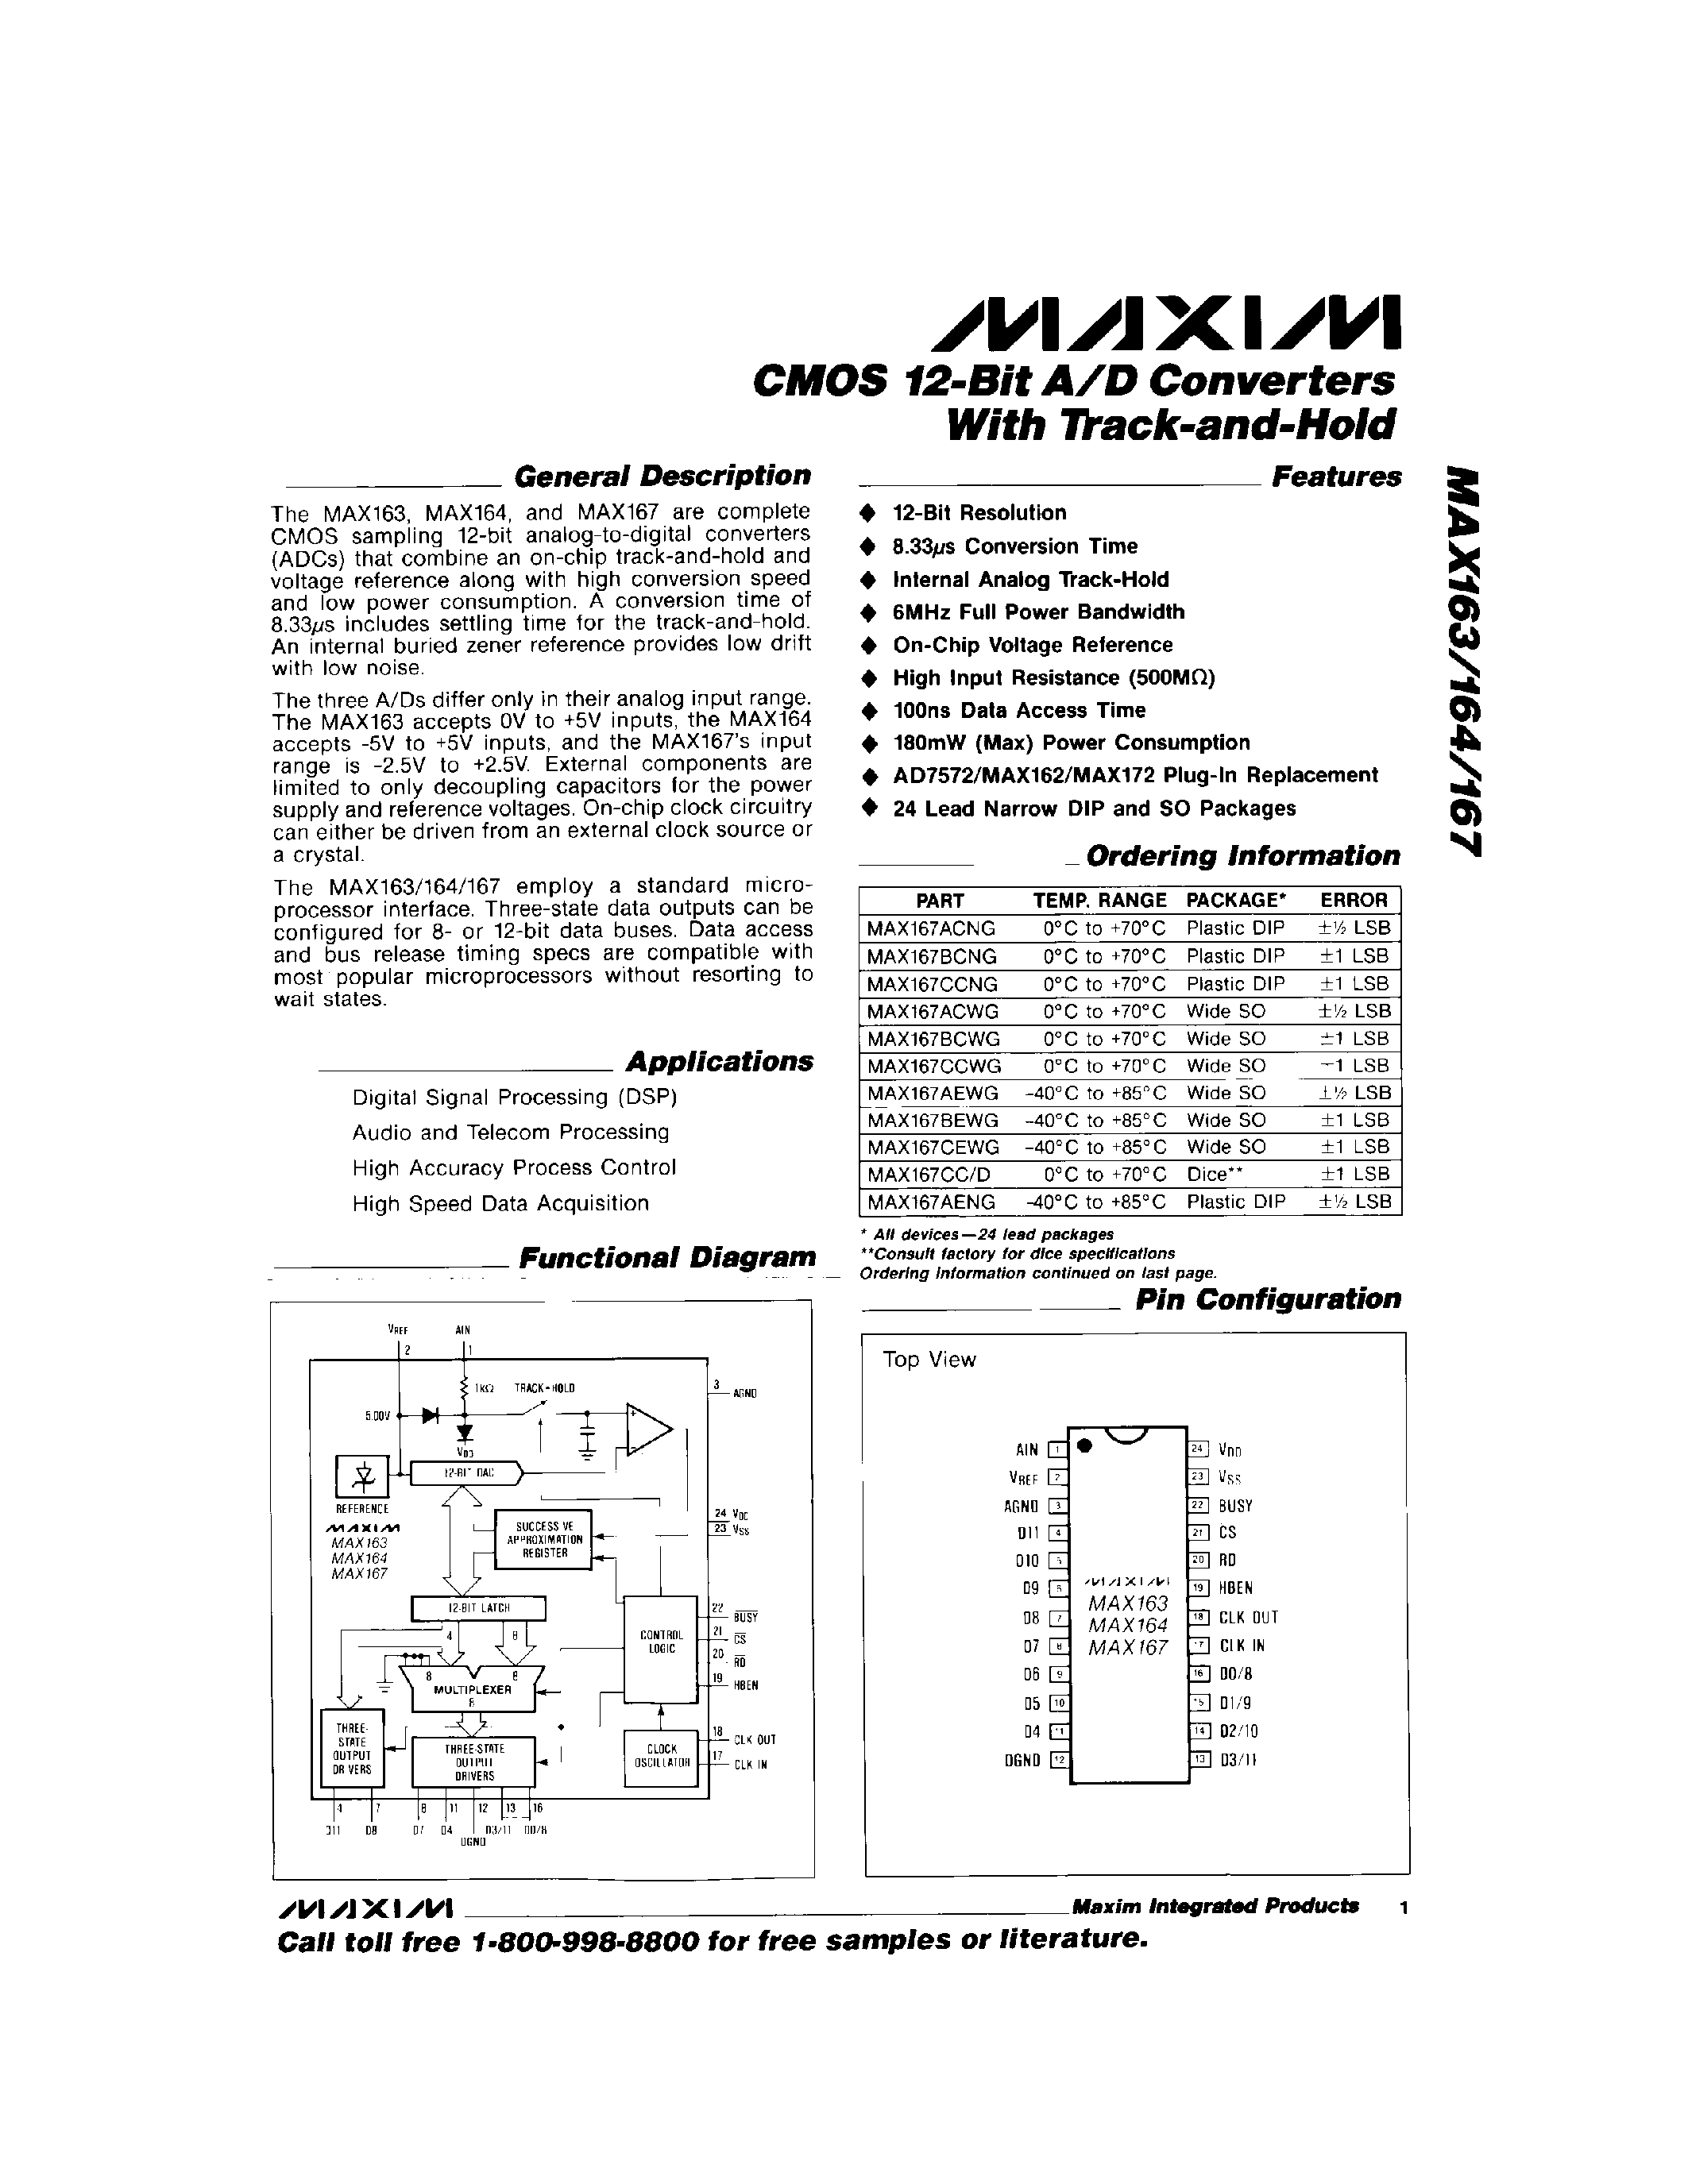 Даташит MAX163CC/D - CMOS 12-Bit A/D Converters With Track-and-Hold страница 1